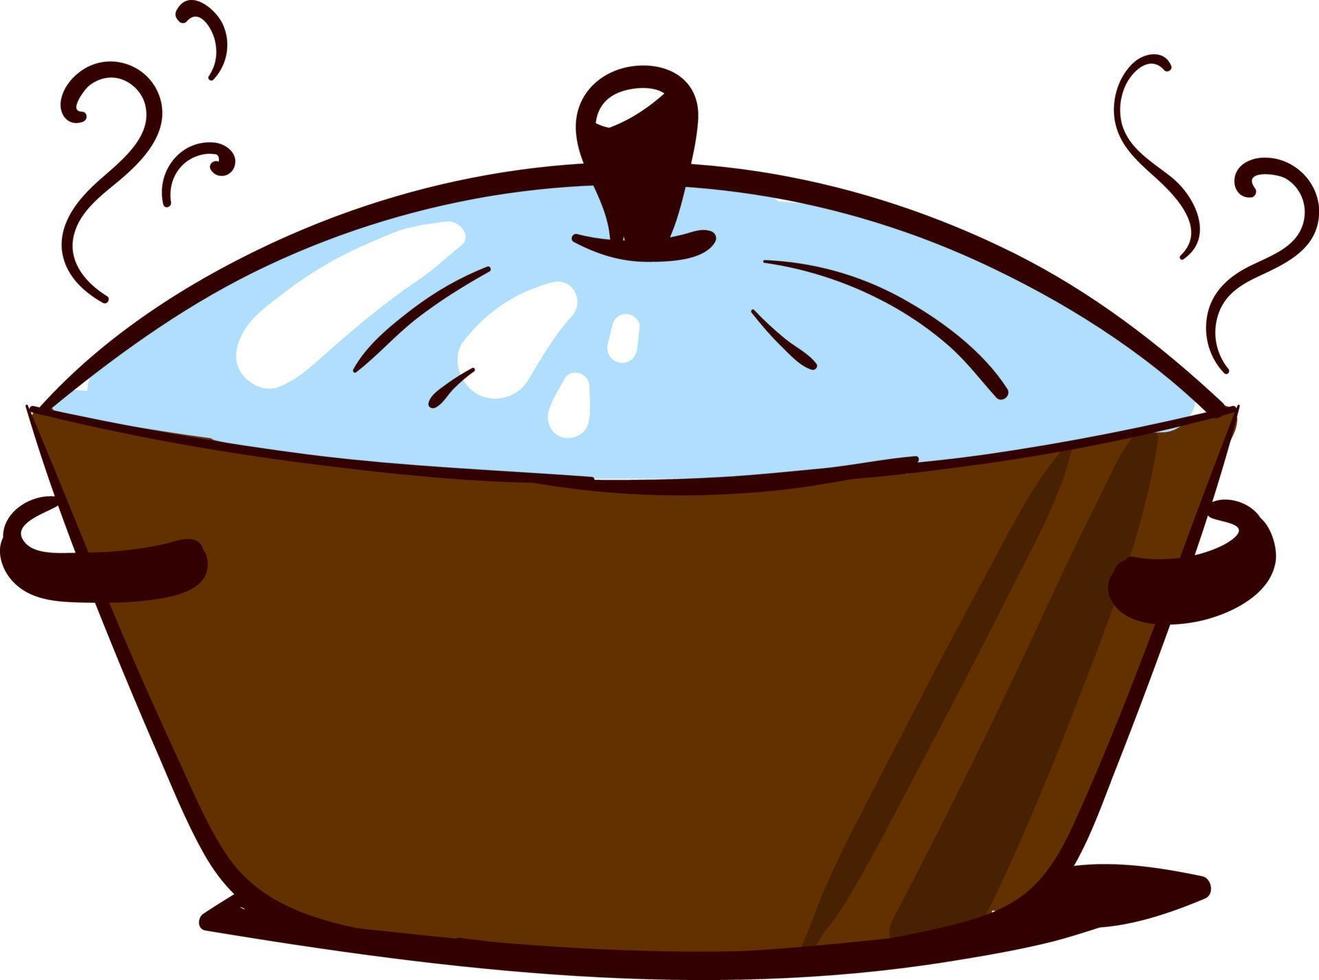 Big brown cooking pot, illustration, vector on white background